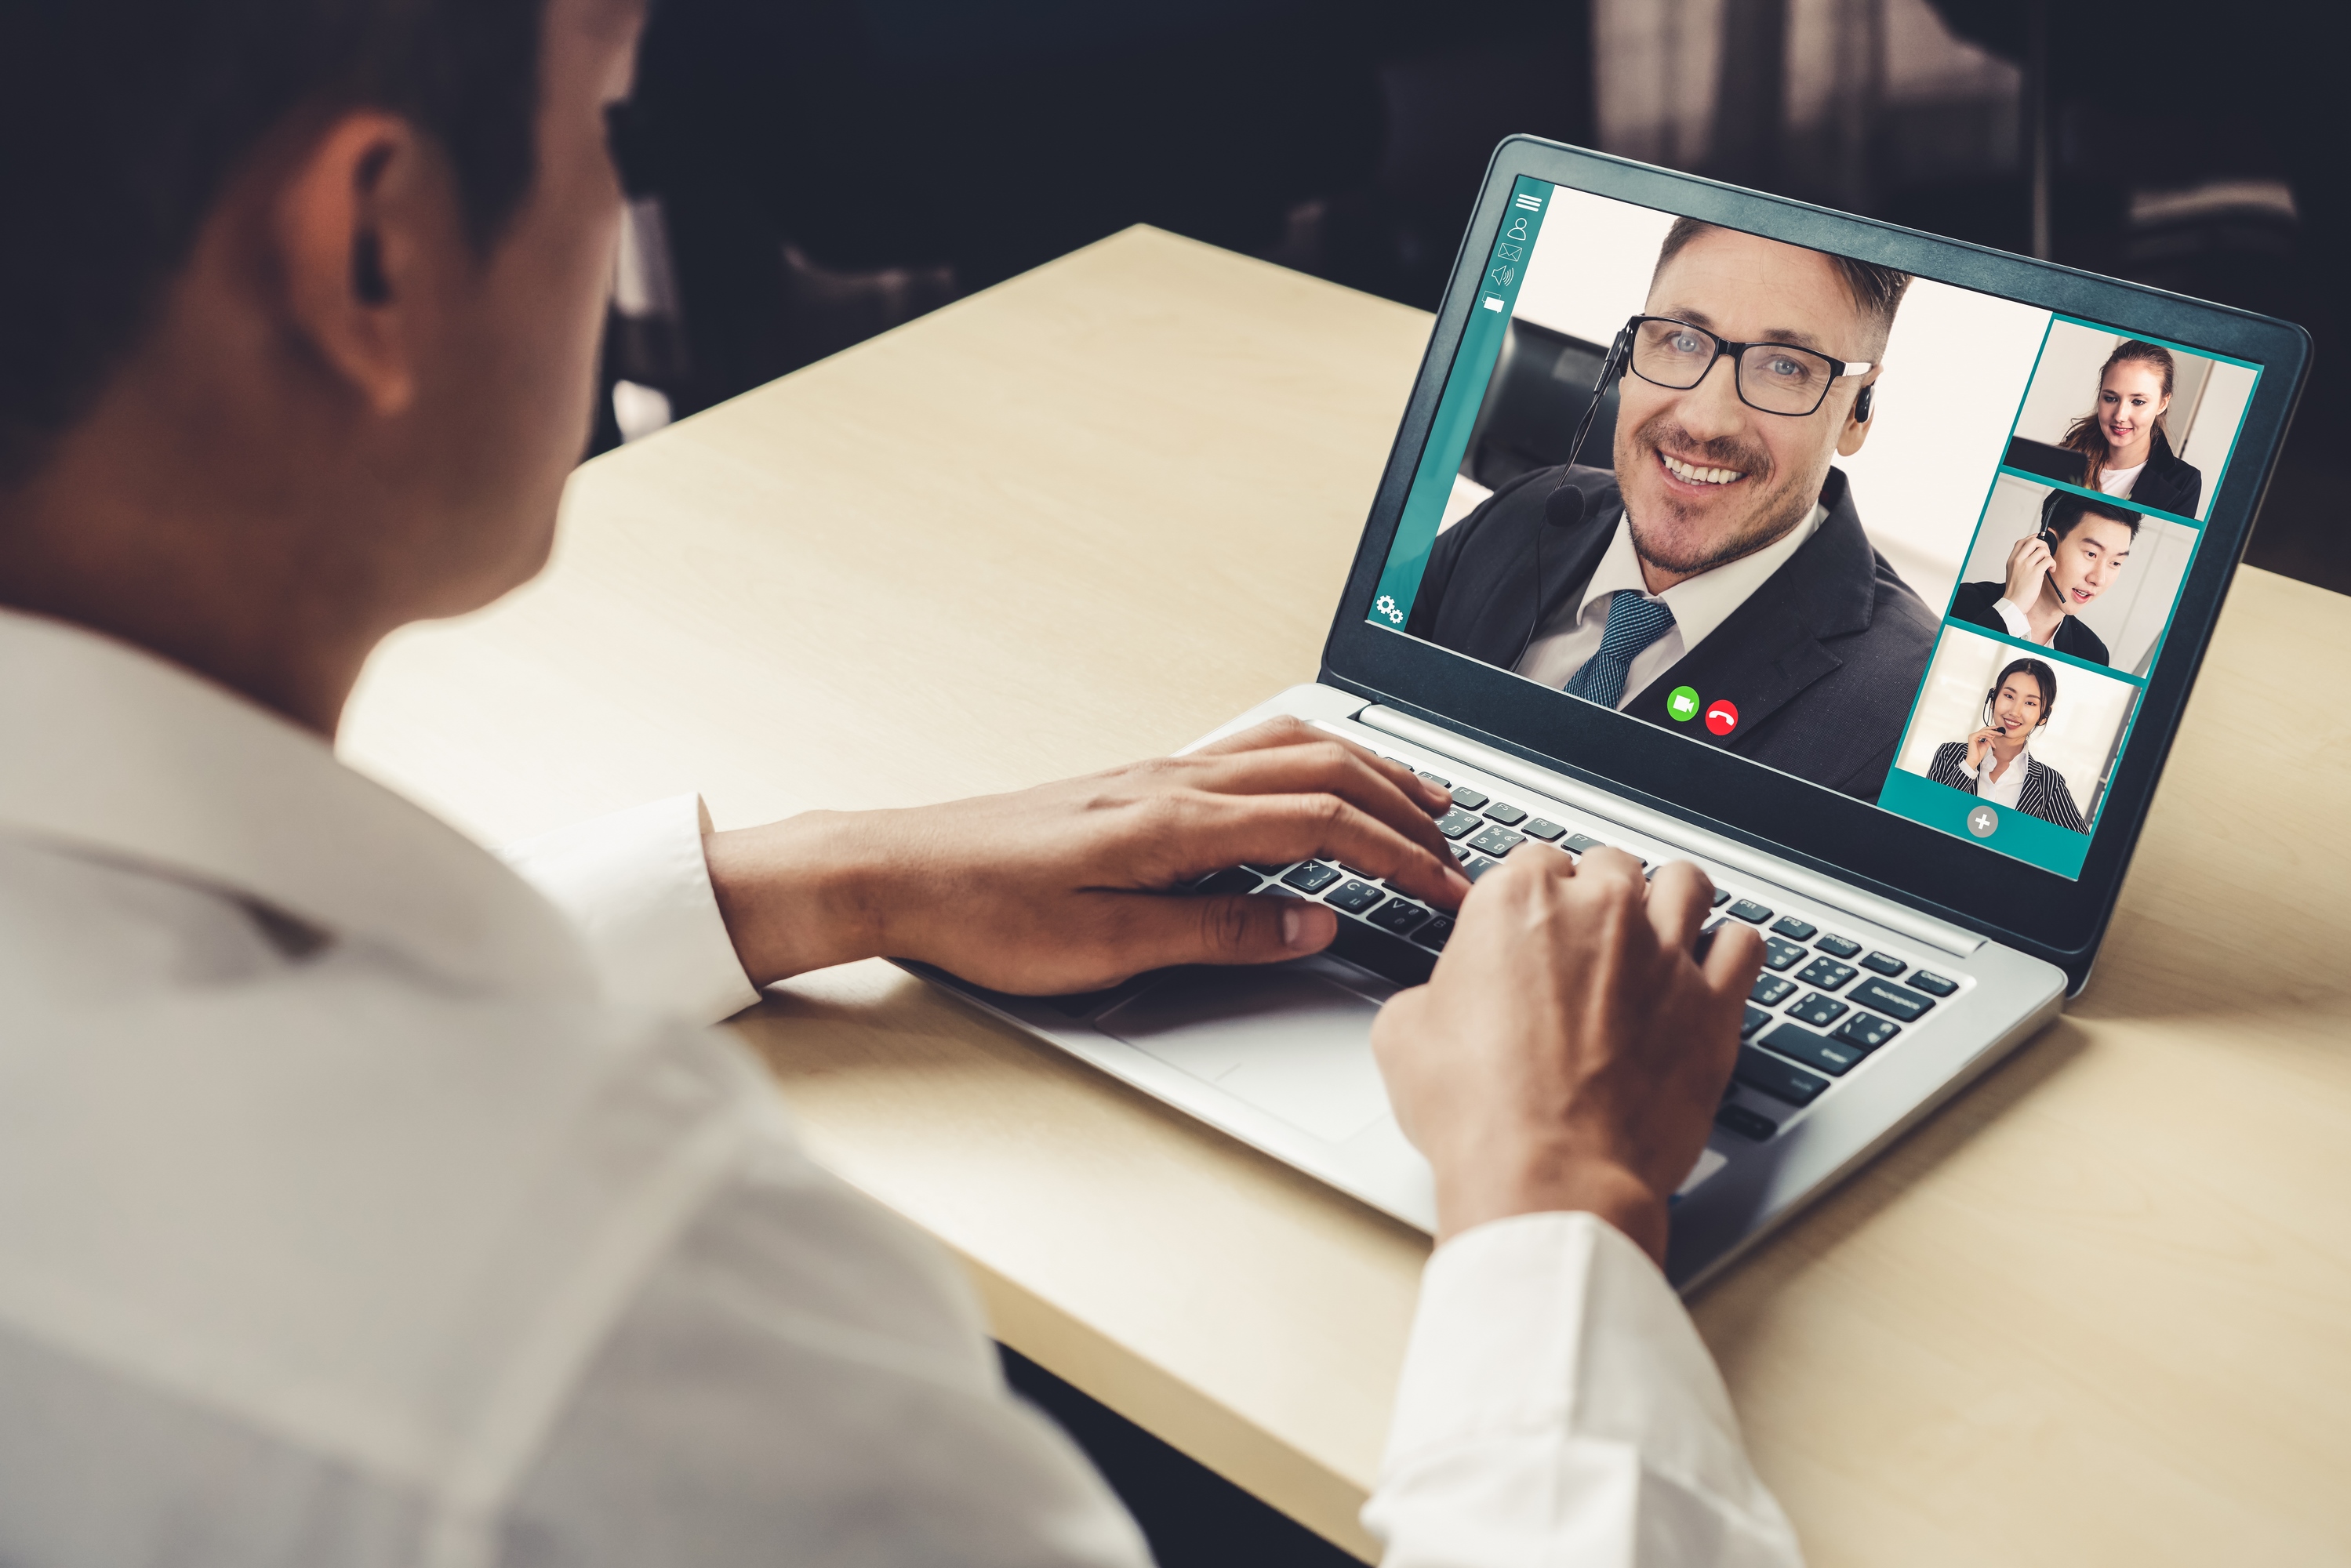 Whenever possible, hold meetings virtually rather than in person.